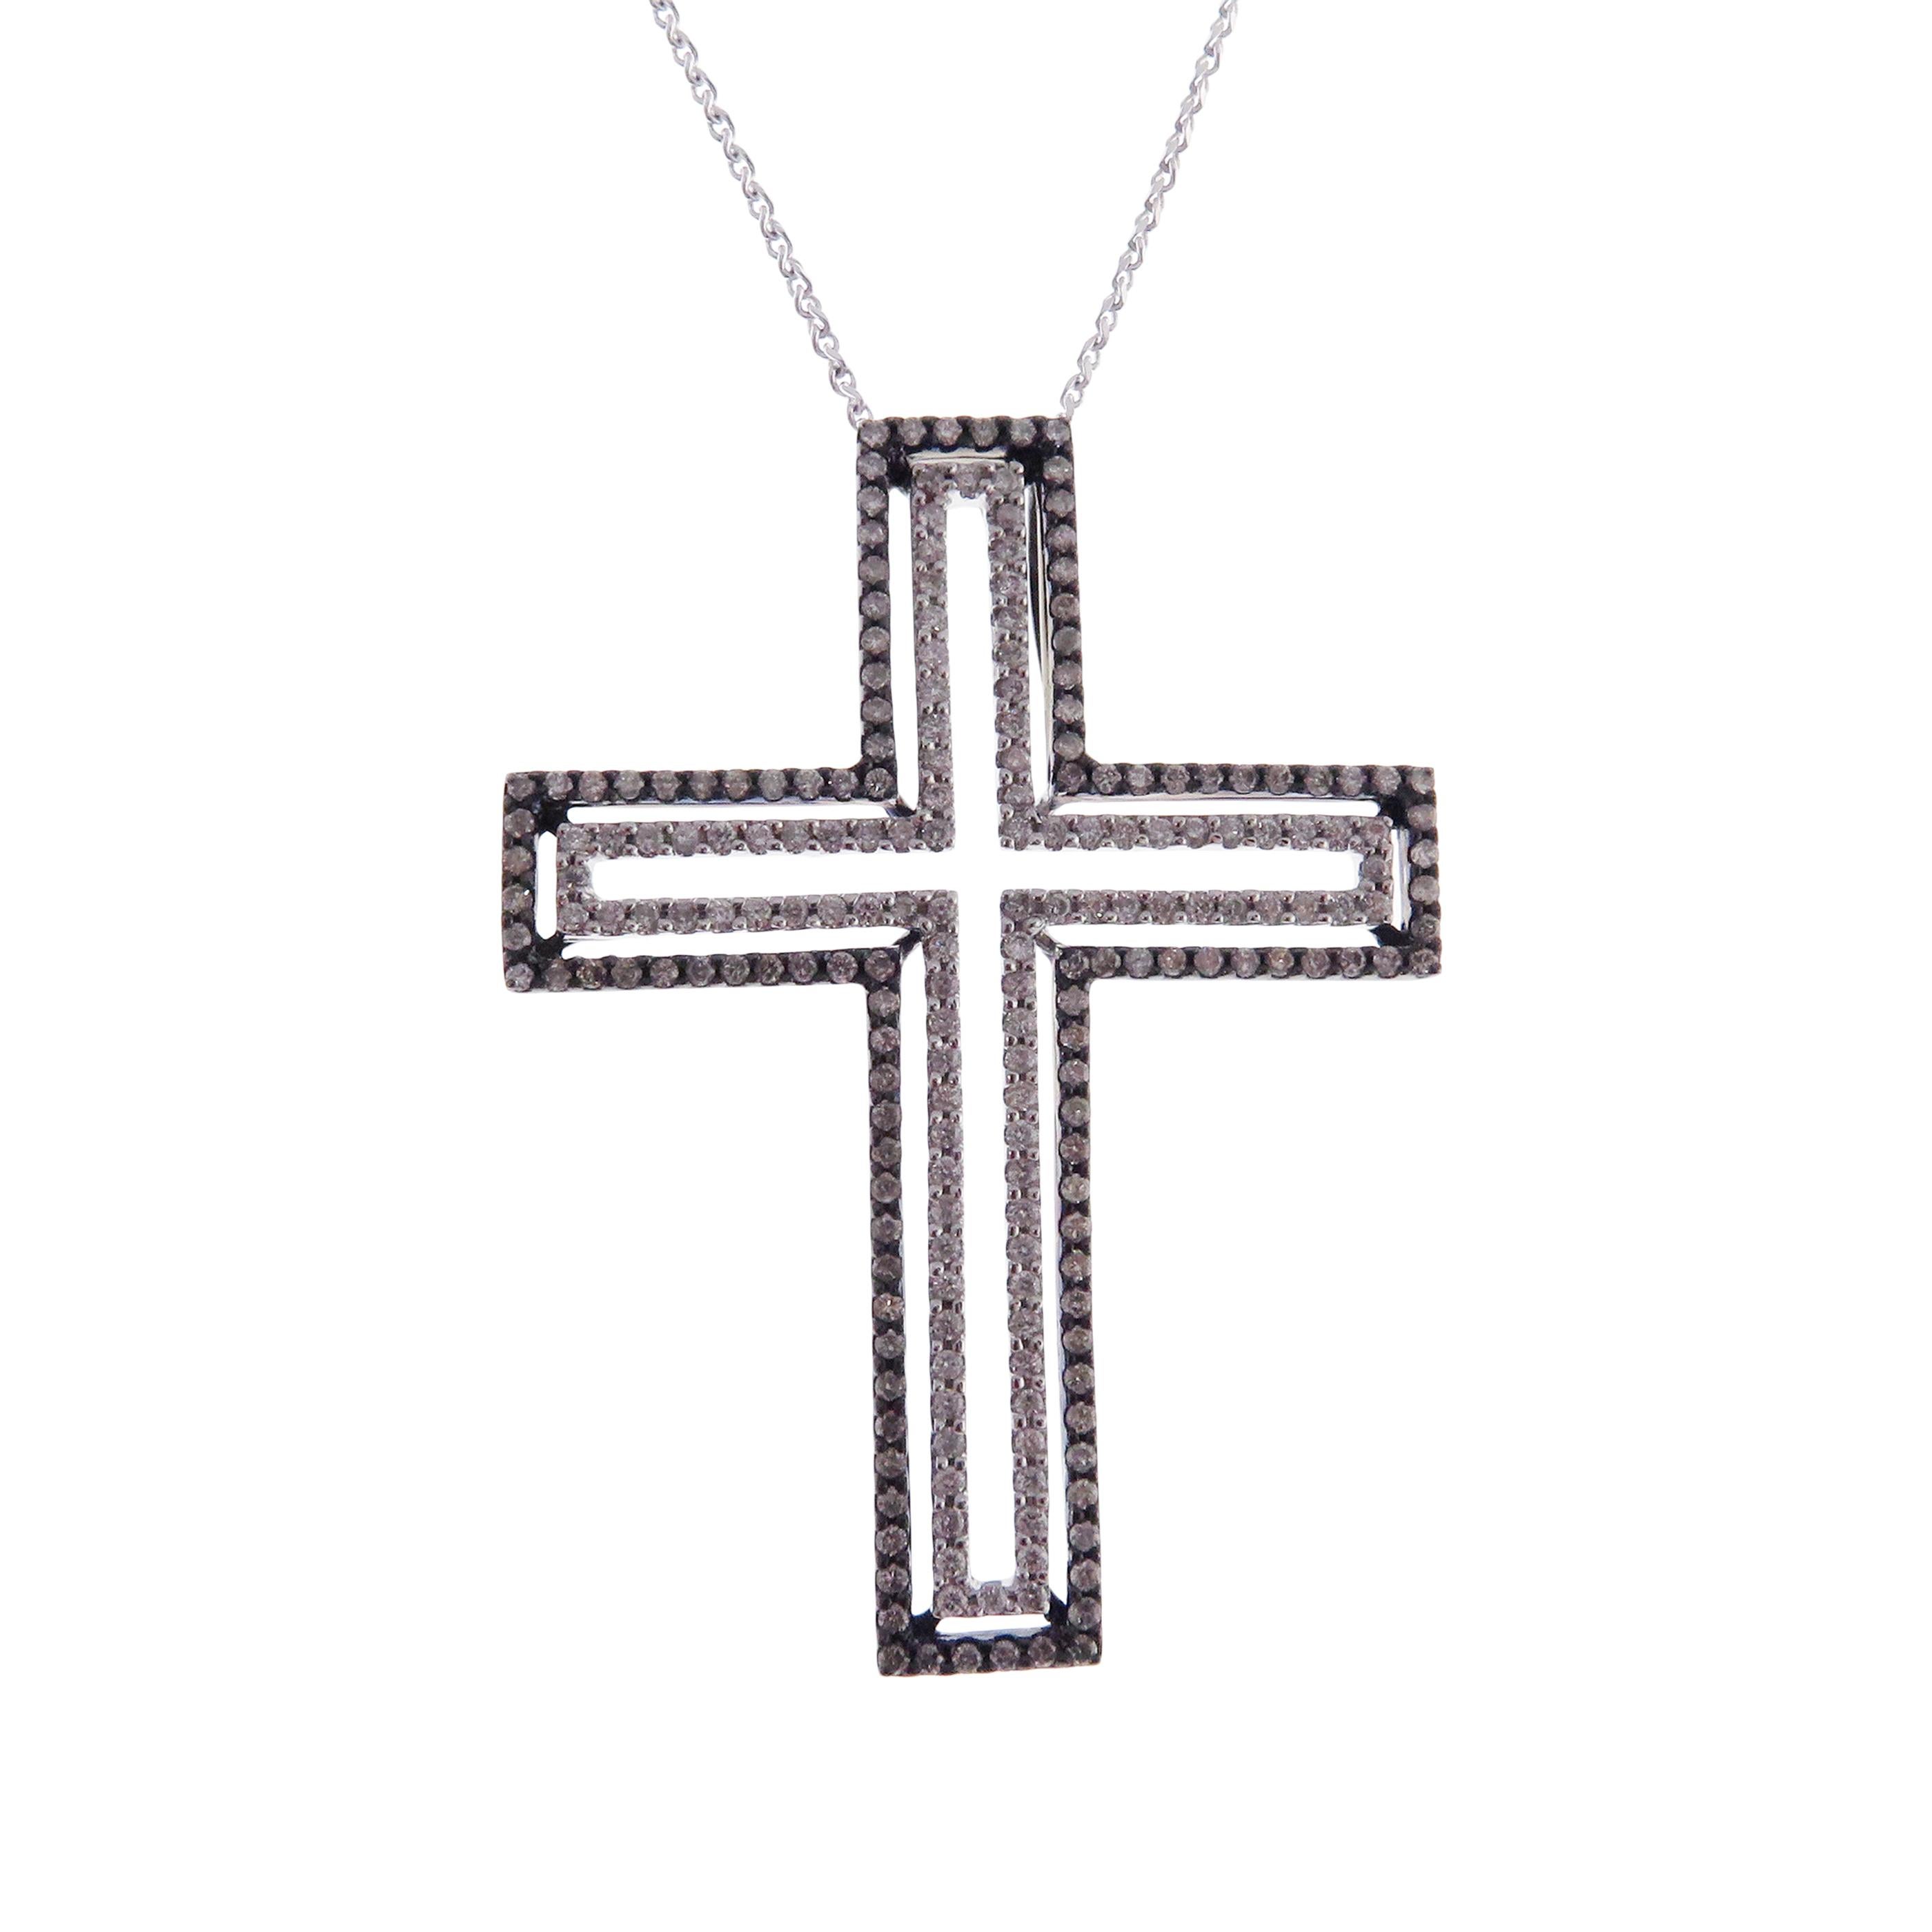 This cross motif necklace is crafted in 18-karat white gold, weighing approximately 1.42 total carats of SI-Quality white diamond. Outer border of cross has black rhodium accents. 

Necklace is 16